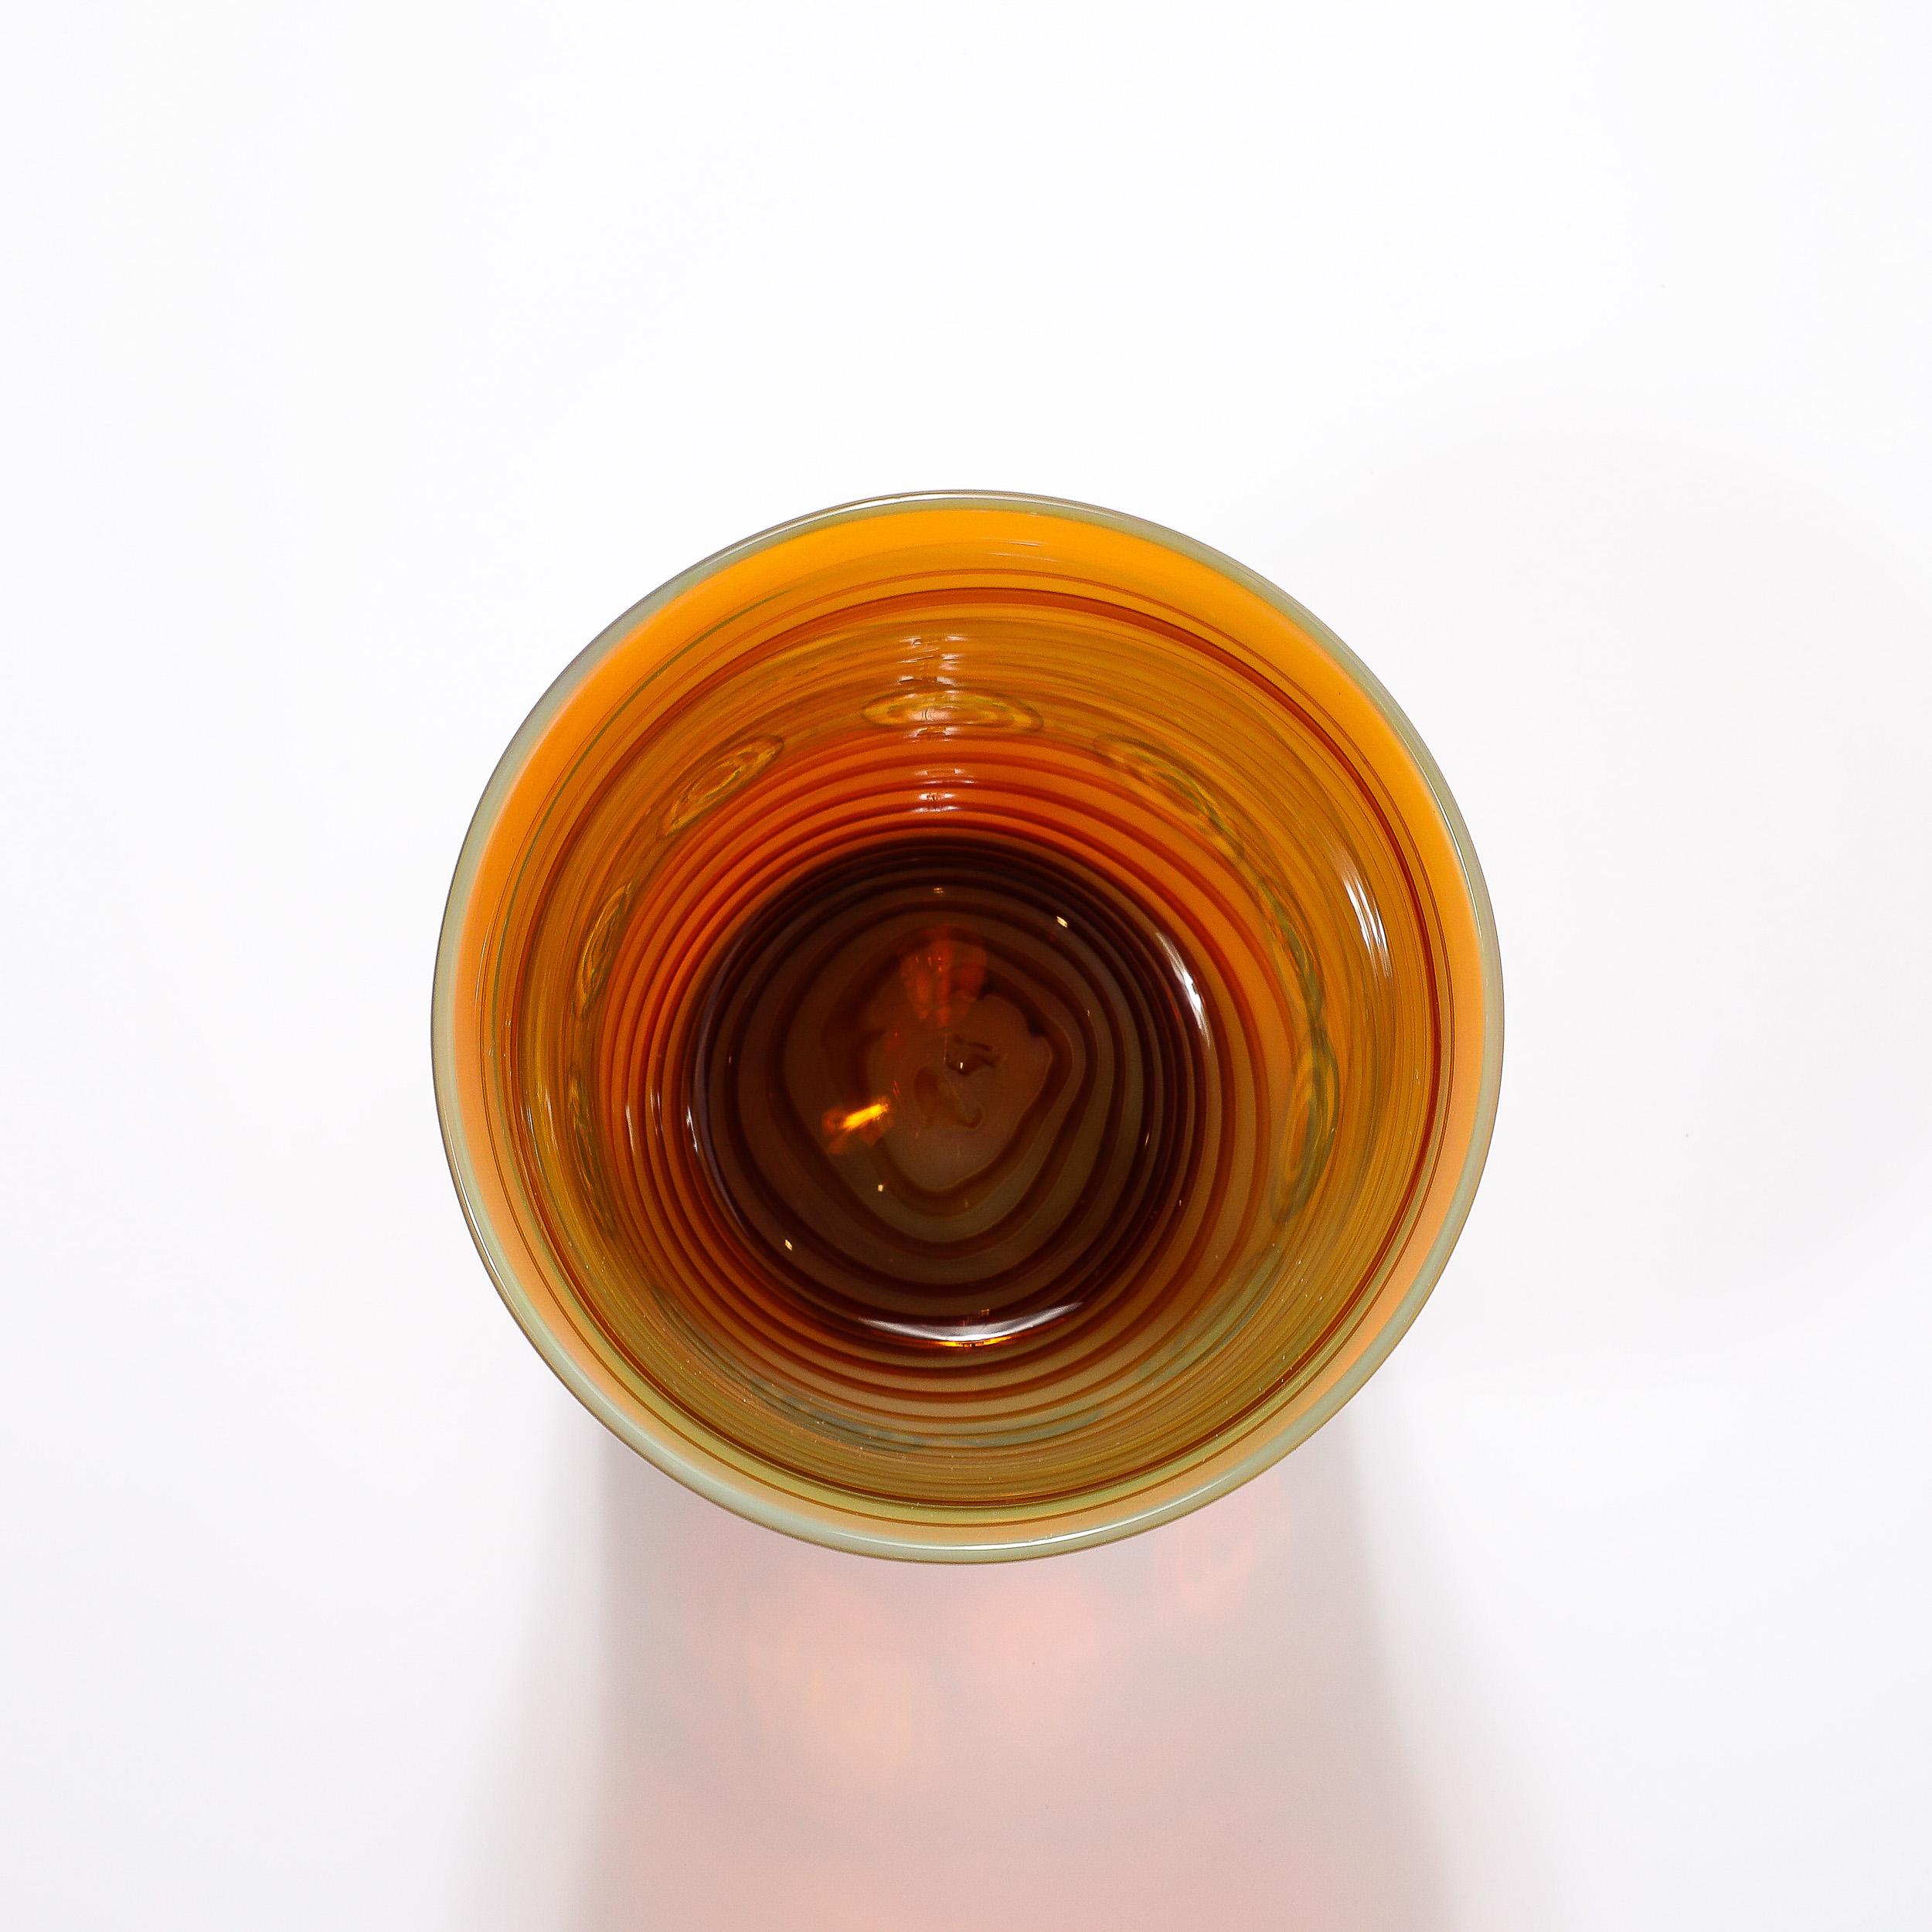 This beautifully colored Mid-Century Modernist Hand-Blown Murano Glass Vase in Banded Citrine W/Amber Ring Detailing originates from Italy during the latter half of the 20th Century. Features a lovely slightly tapered form leading downwards from the